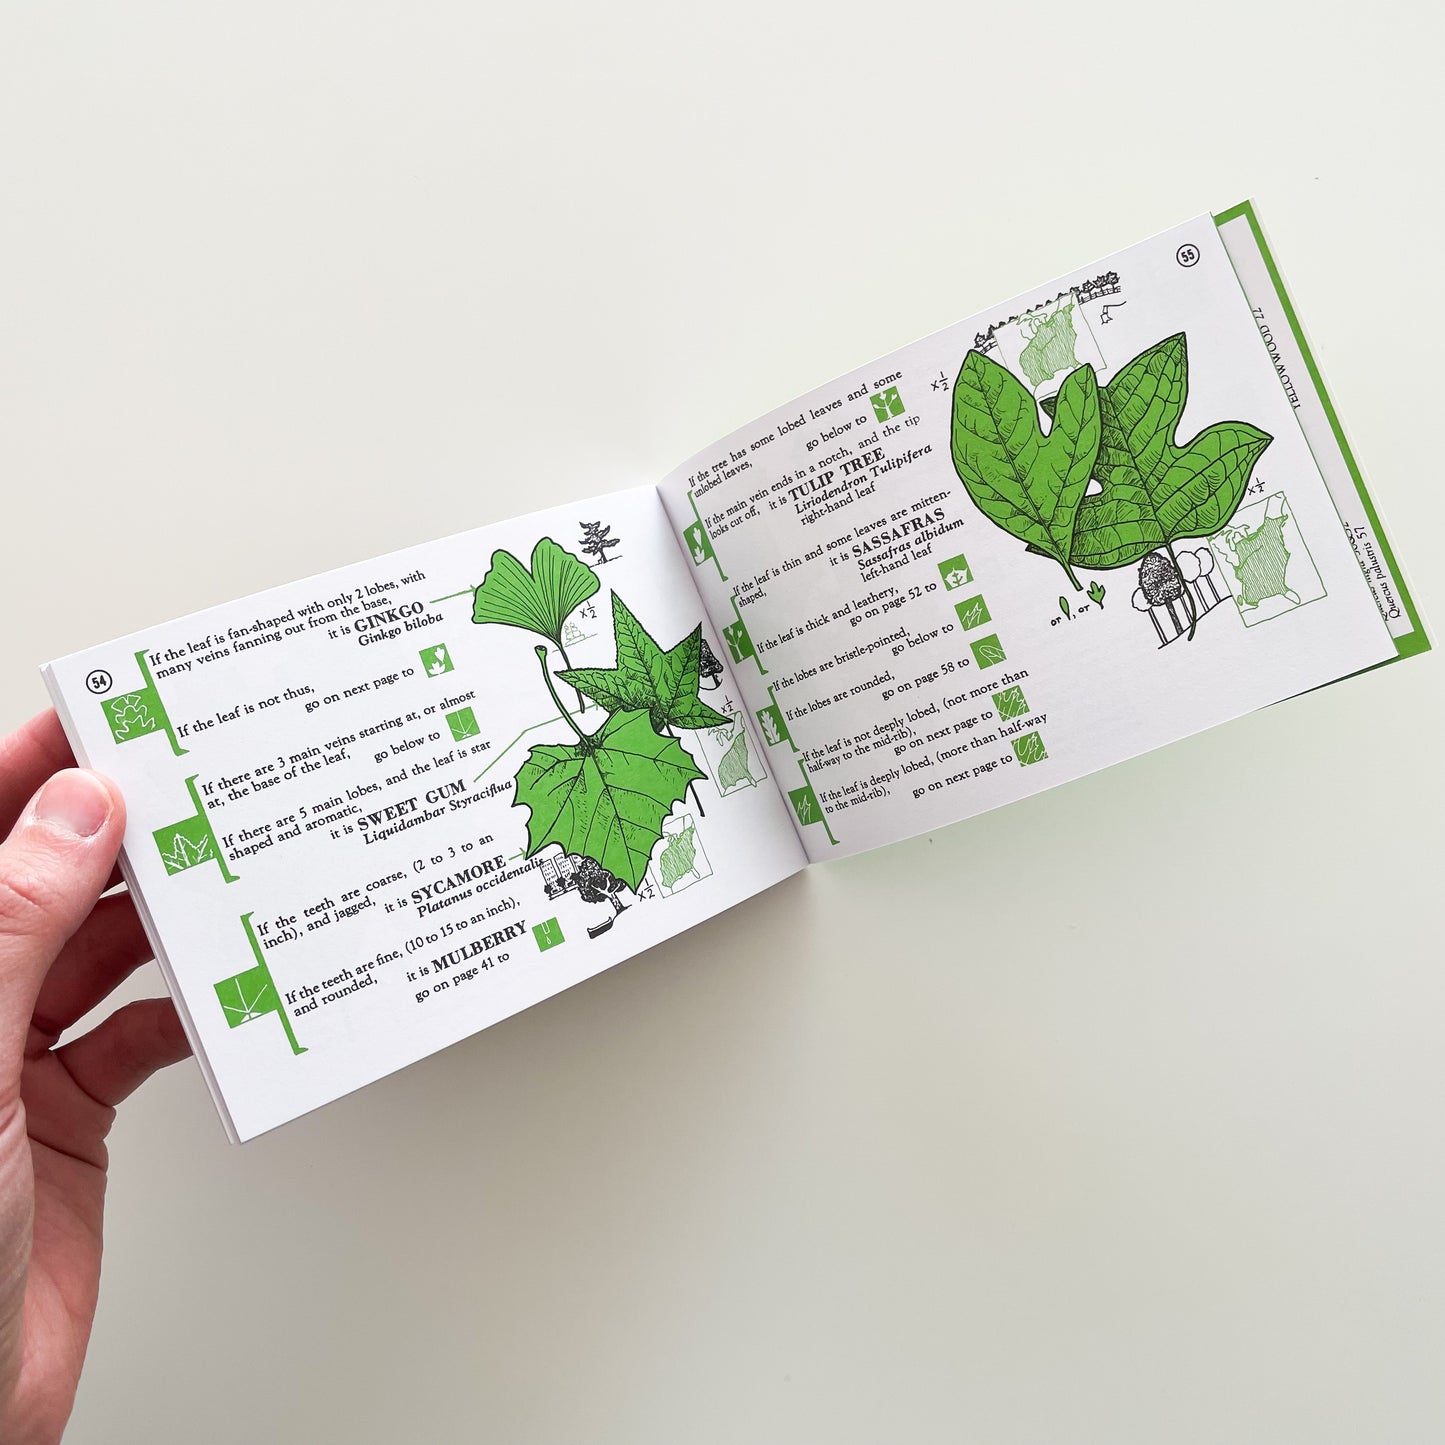 Tree Finder: A Manual For the Identification of Trees by Their Leaves